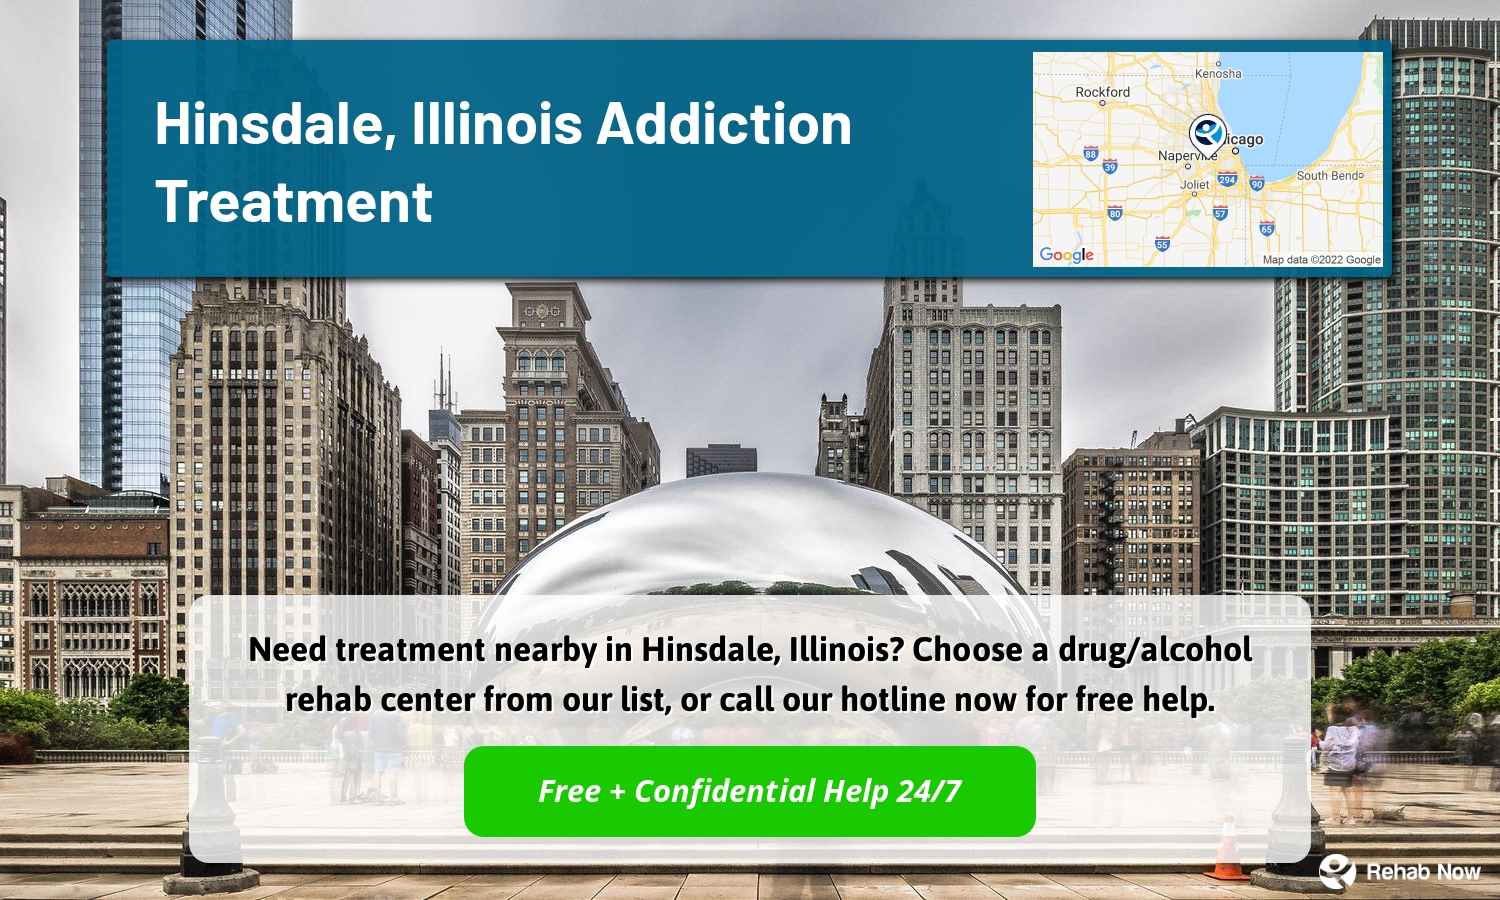 Need treatment nearby in Hinsdale, Illinois? Choose a drug/alcohol rehab center from our list, or call our hotline now for free help.